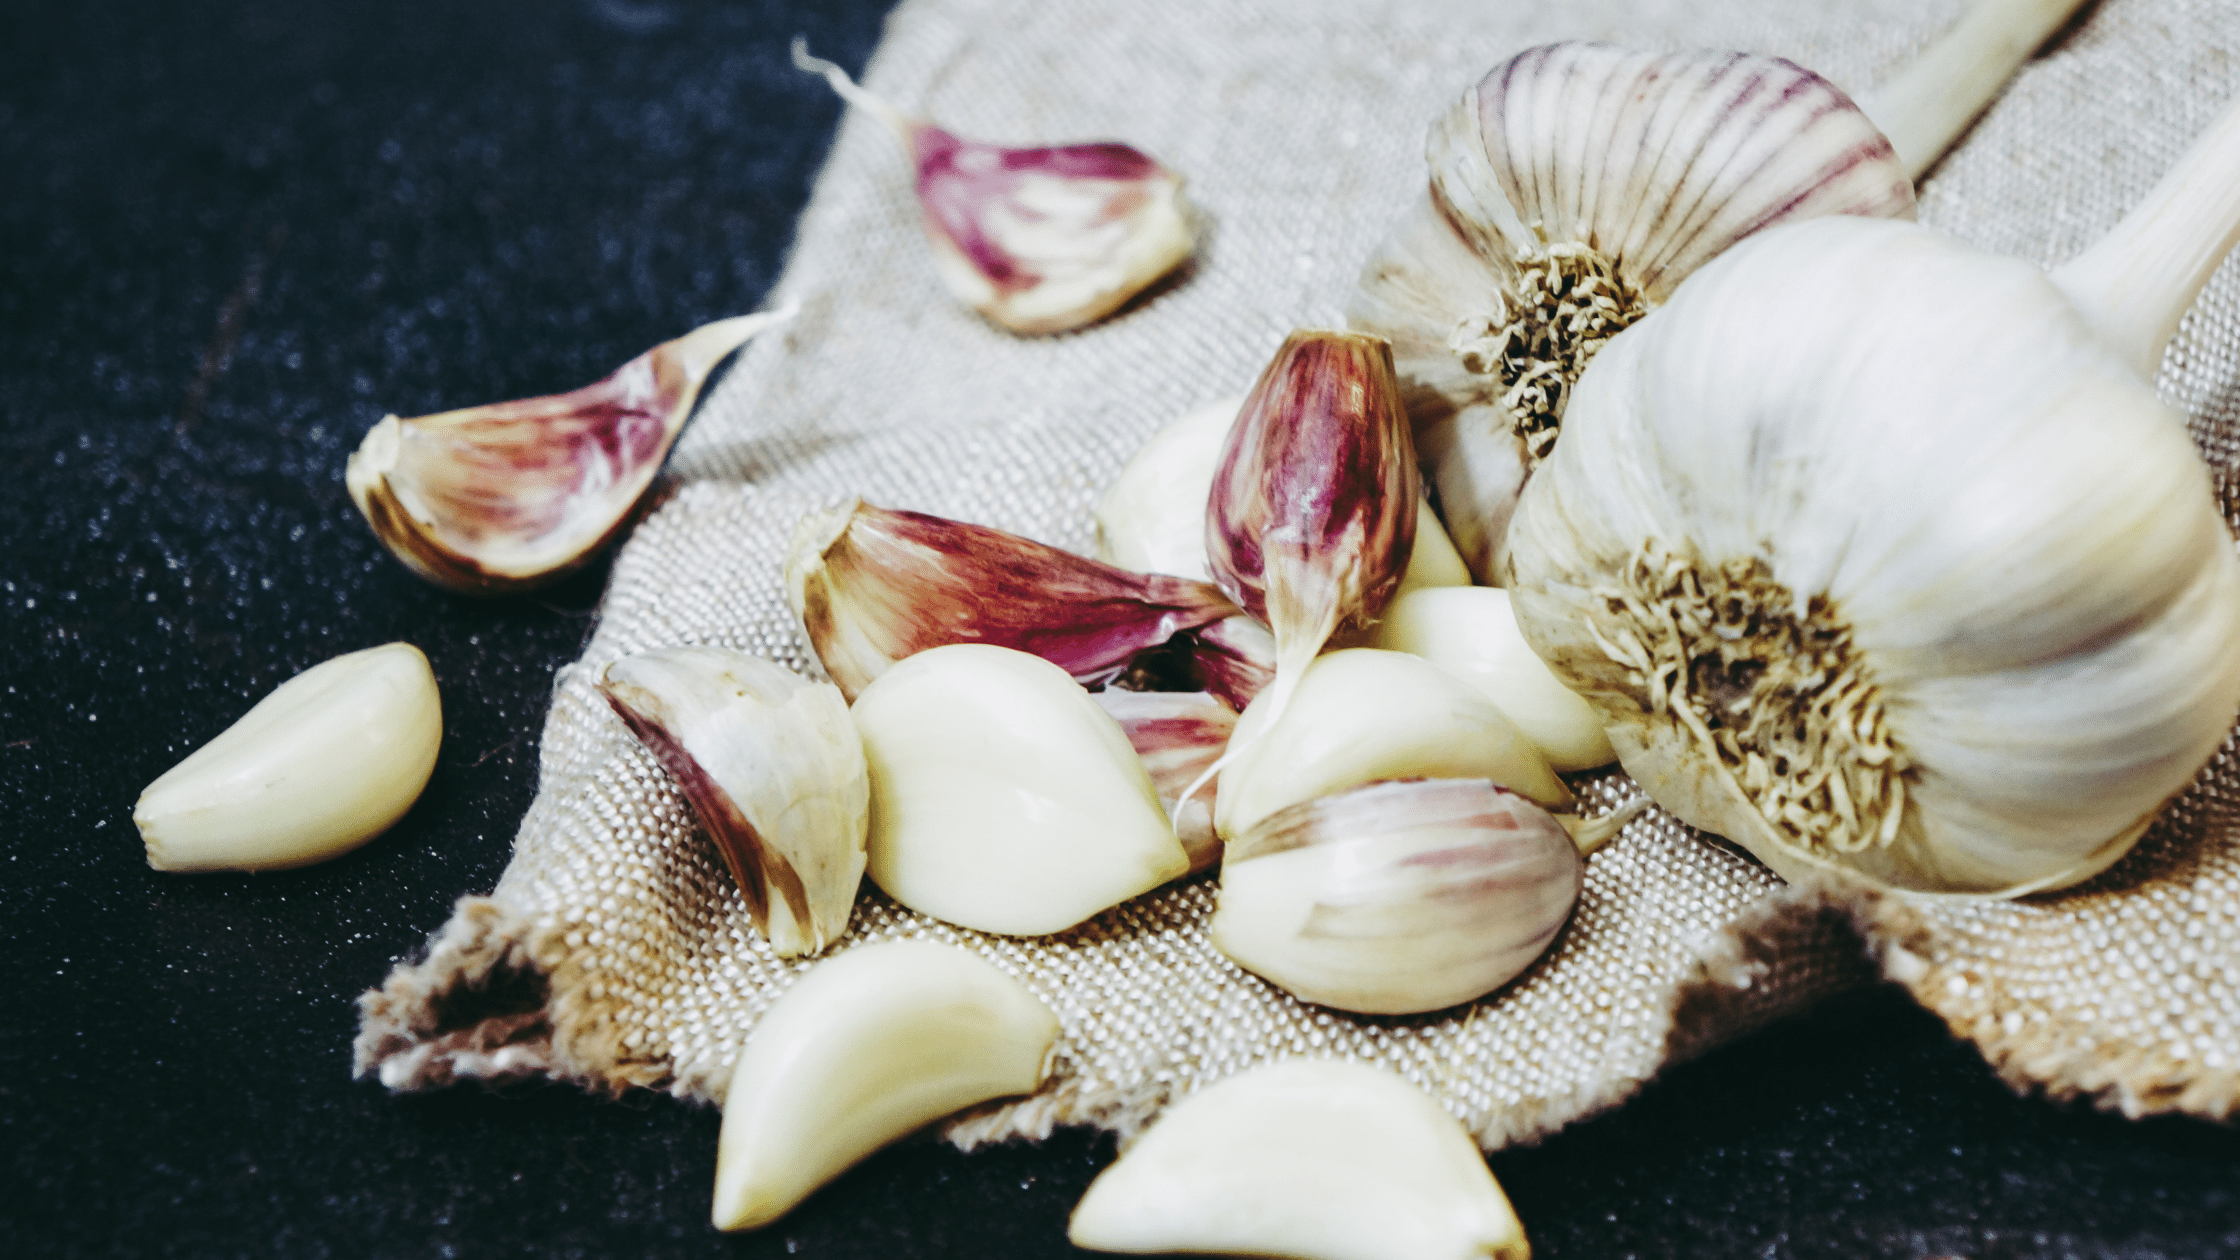 How Many Cloves Are in a Head of Garlic